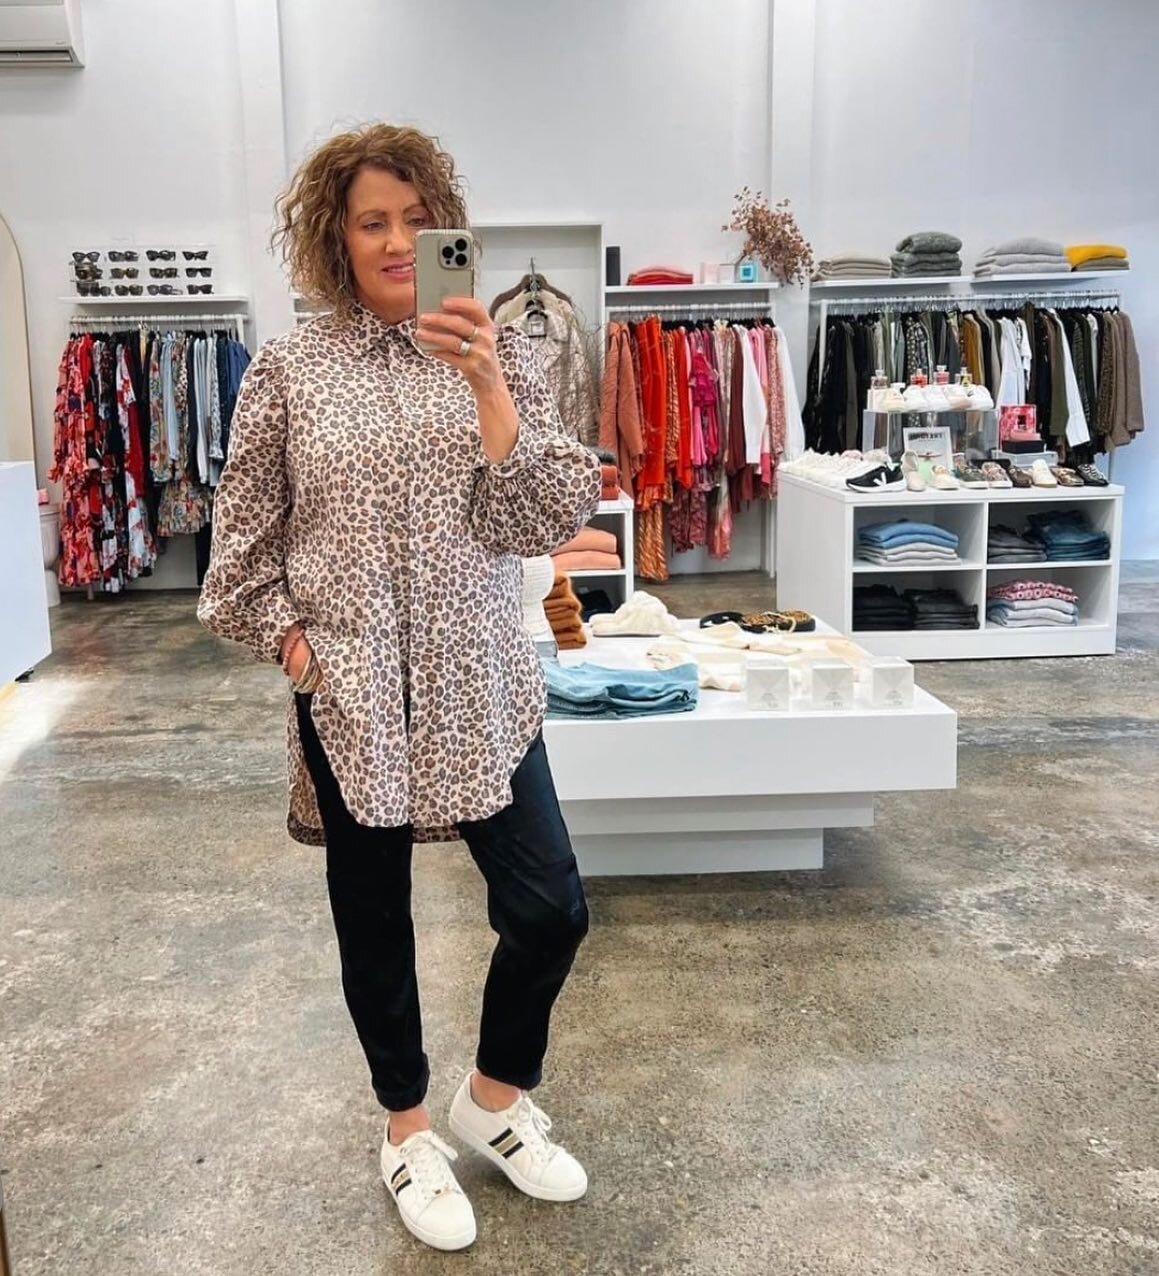 the ZEAL shirt - you can&rsquo;t go wrong with this baby &hellip;
Jenny looking fab @rubyroseboutique_ 💗
@zoekratzmannfootwearandapparel